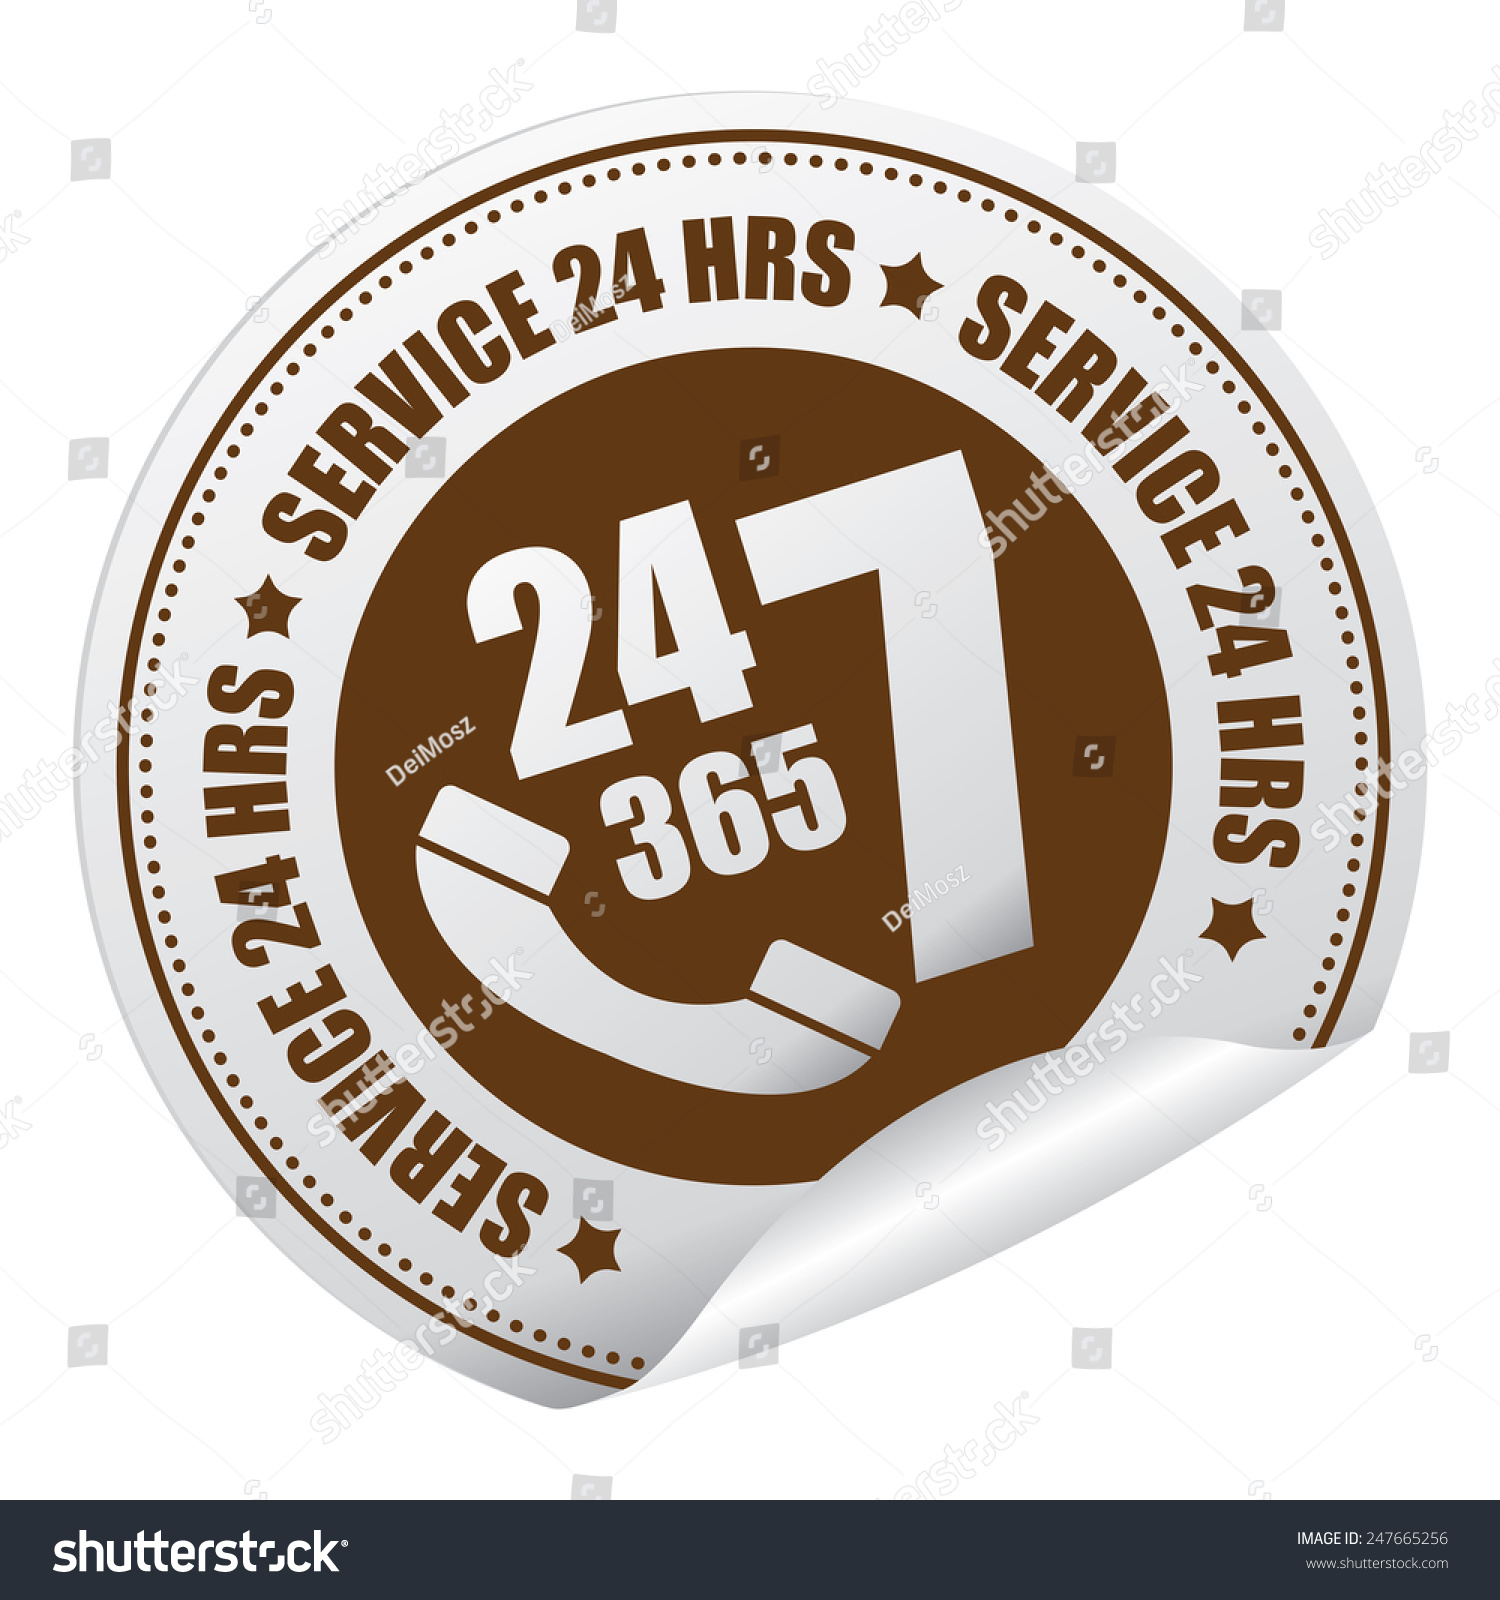 Brown 24 7 365 Service 24 Hrs Or 24 Hours A Day Royalty Free Stock Photo Avopix Com